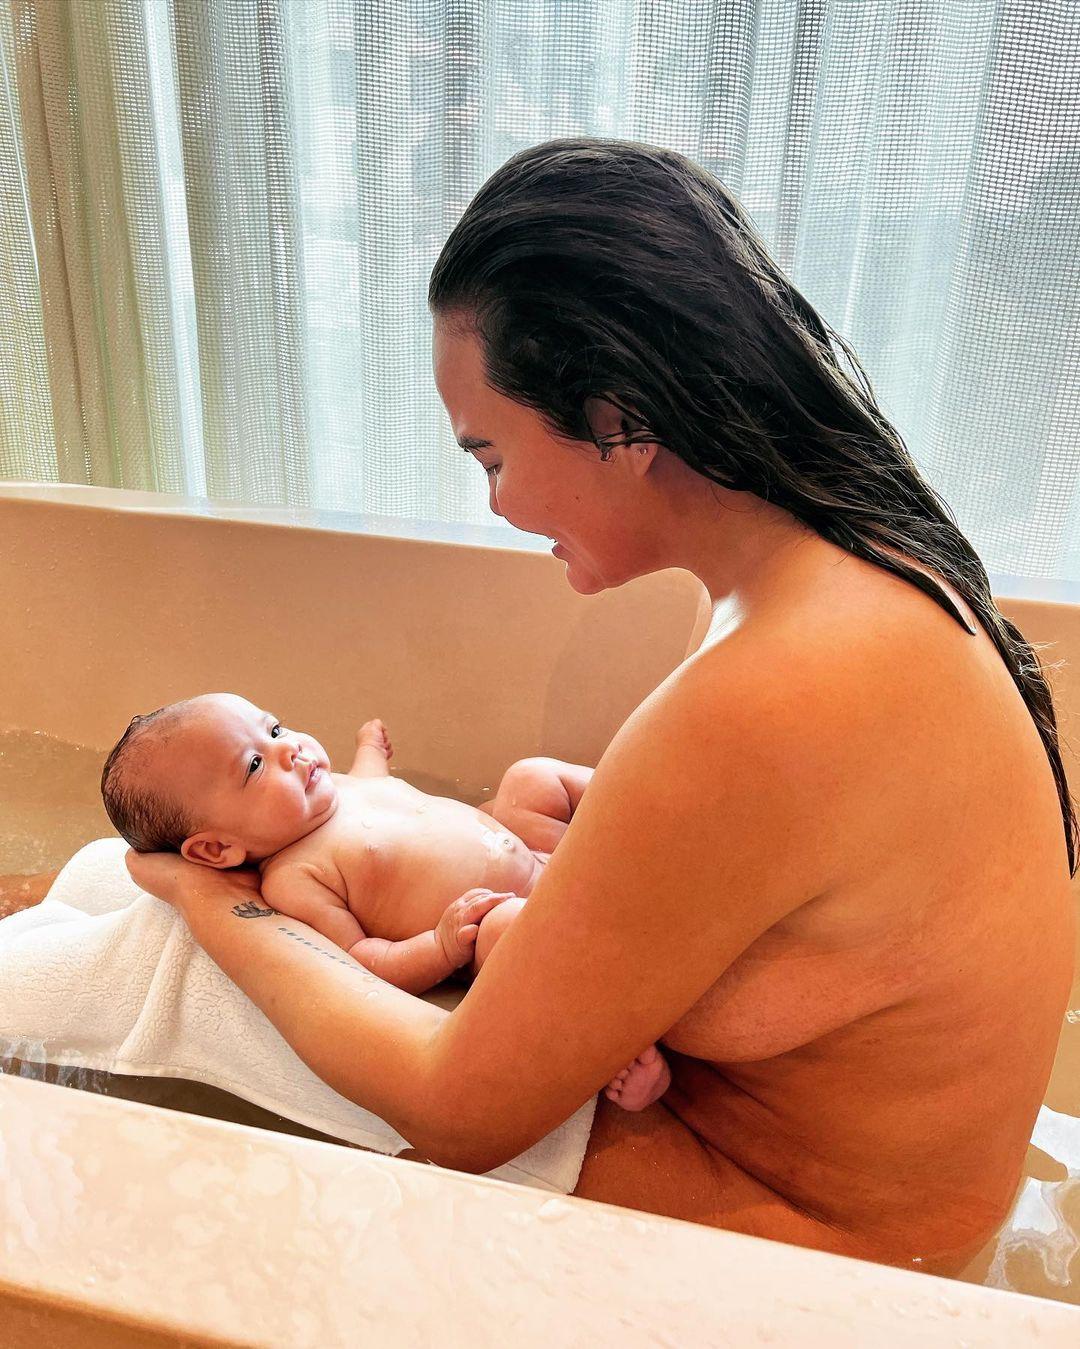 Chrissy Teigen Doesn't Care About 'Boob That Hangs' While In The Bathtub With Her Newborn